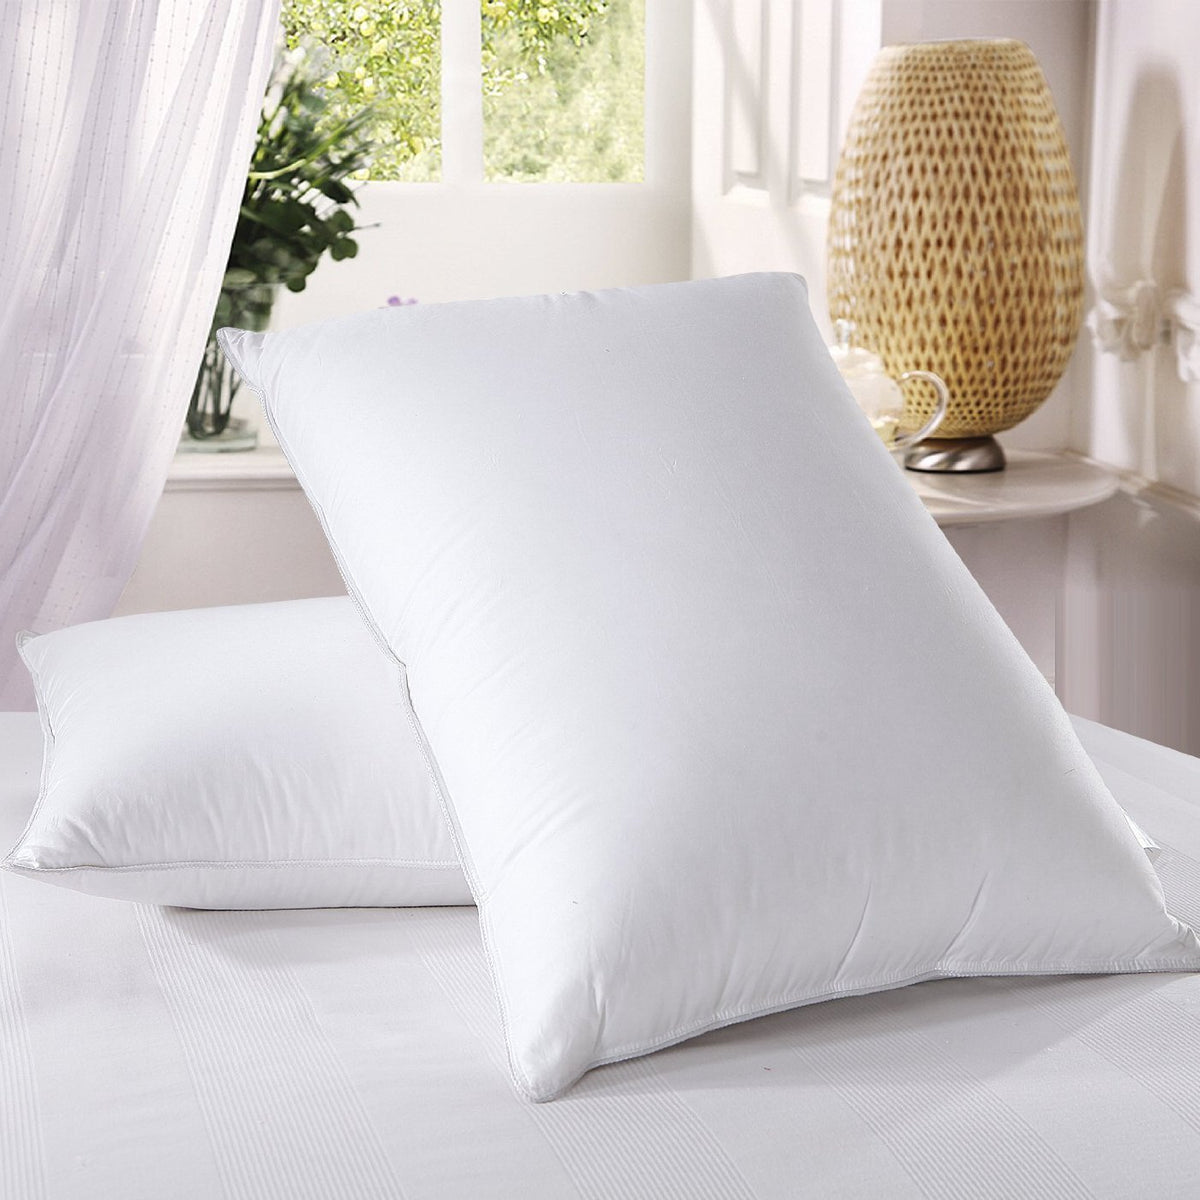 Xtreme Comforts SlimSleeper Shredded Memory Foam Bamboo Pillow Review